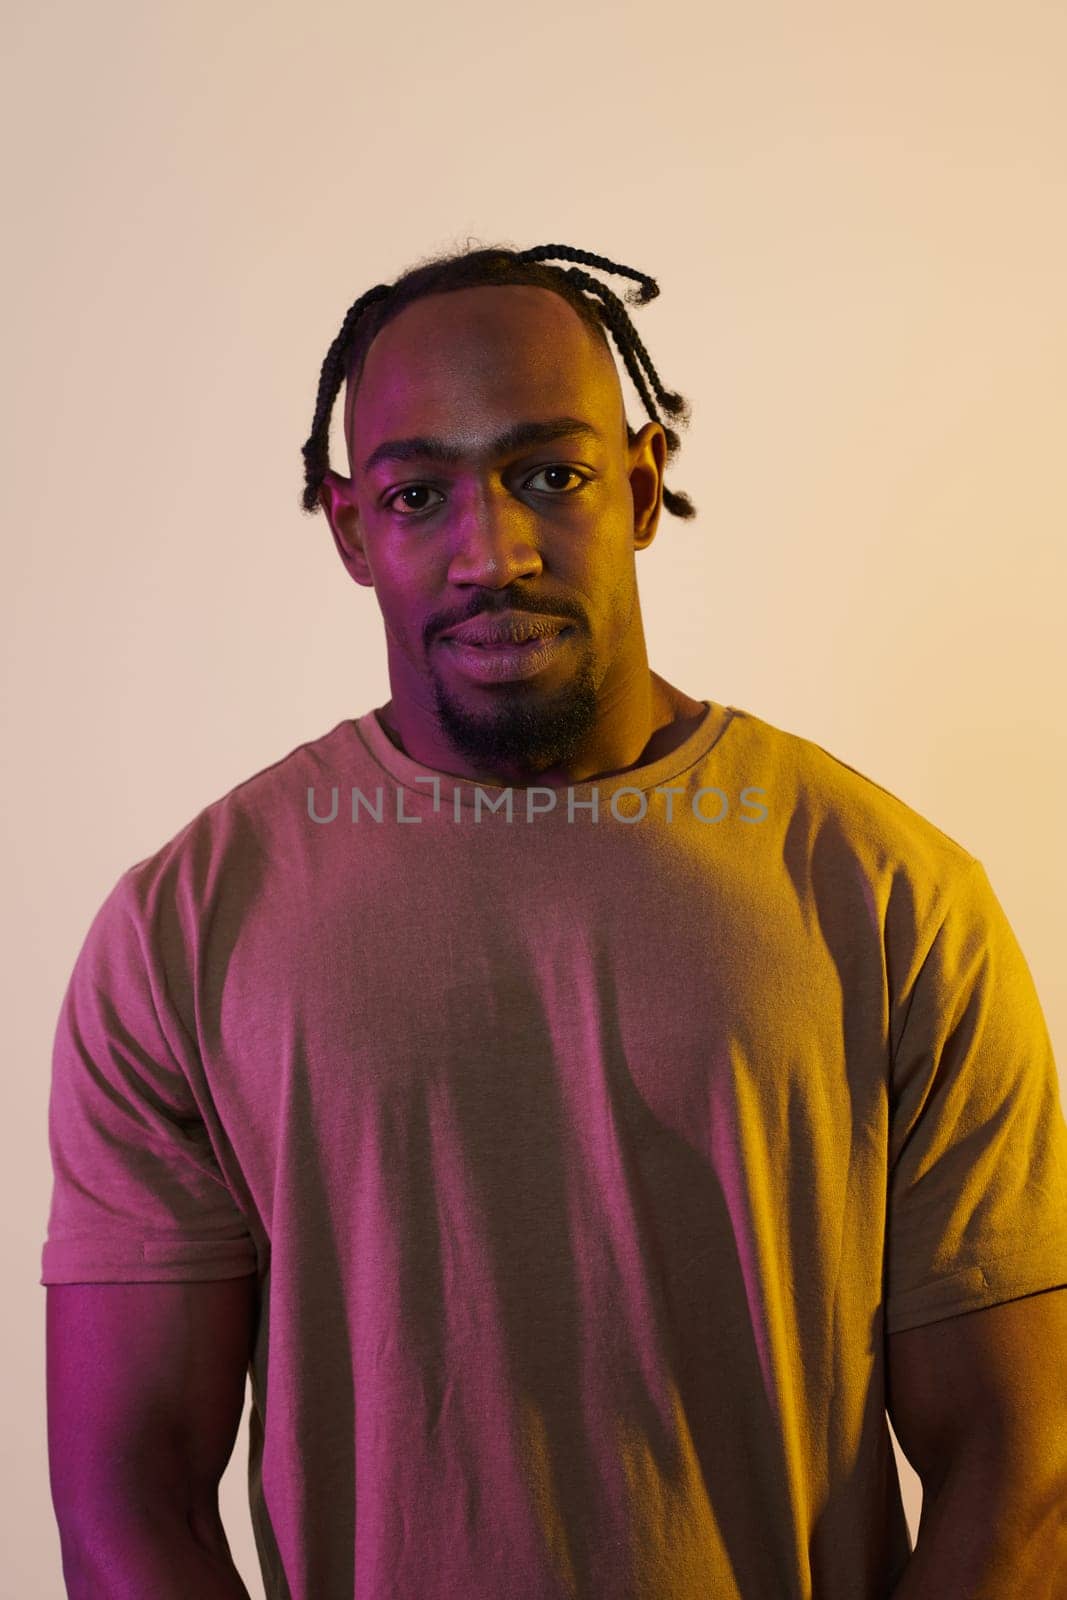 A charismatic and stylish African American man commands attention against a vibrant yellow gel background, showcasing his confident and contemporary fashion sense, radiating charm and sophistication in a striking portrait.